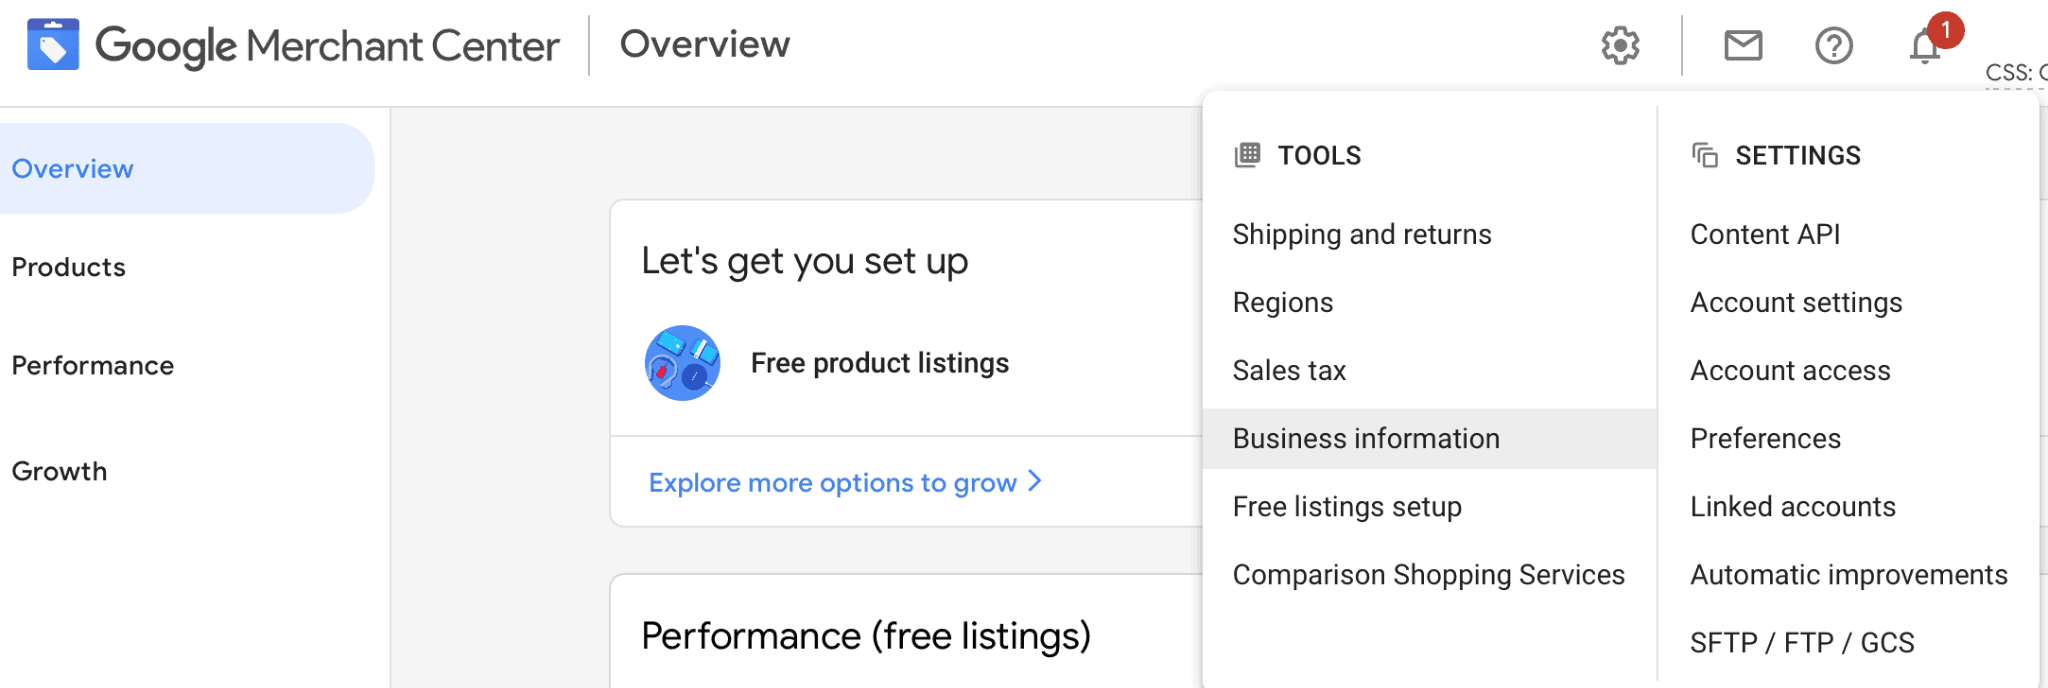 Page of Google Merchant Center Dashboard